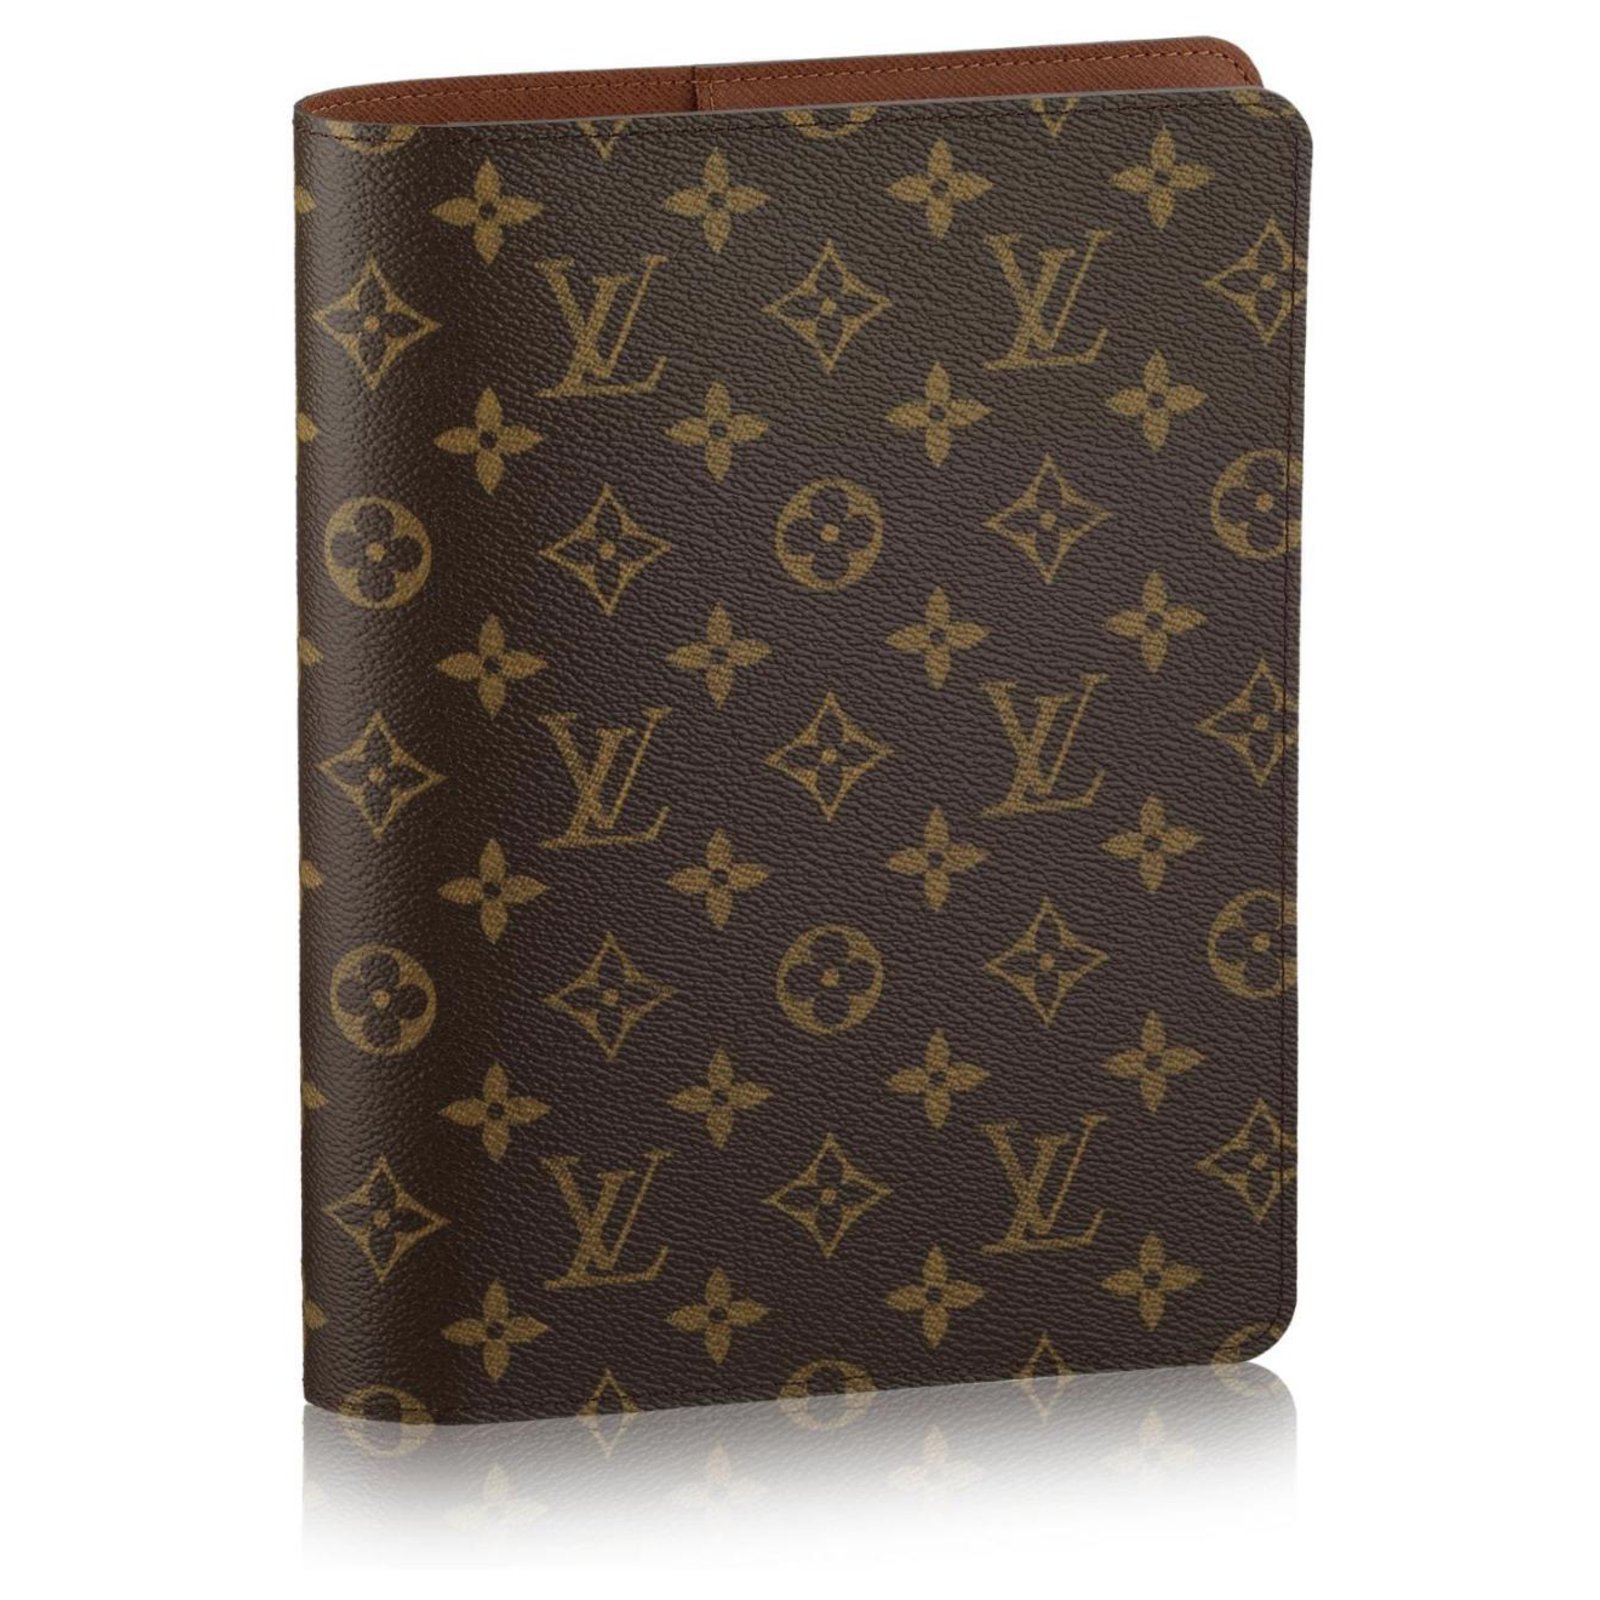 lv covers